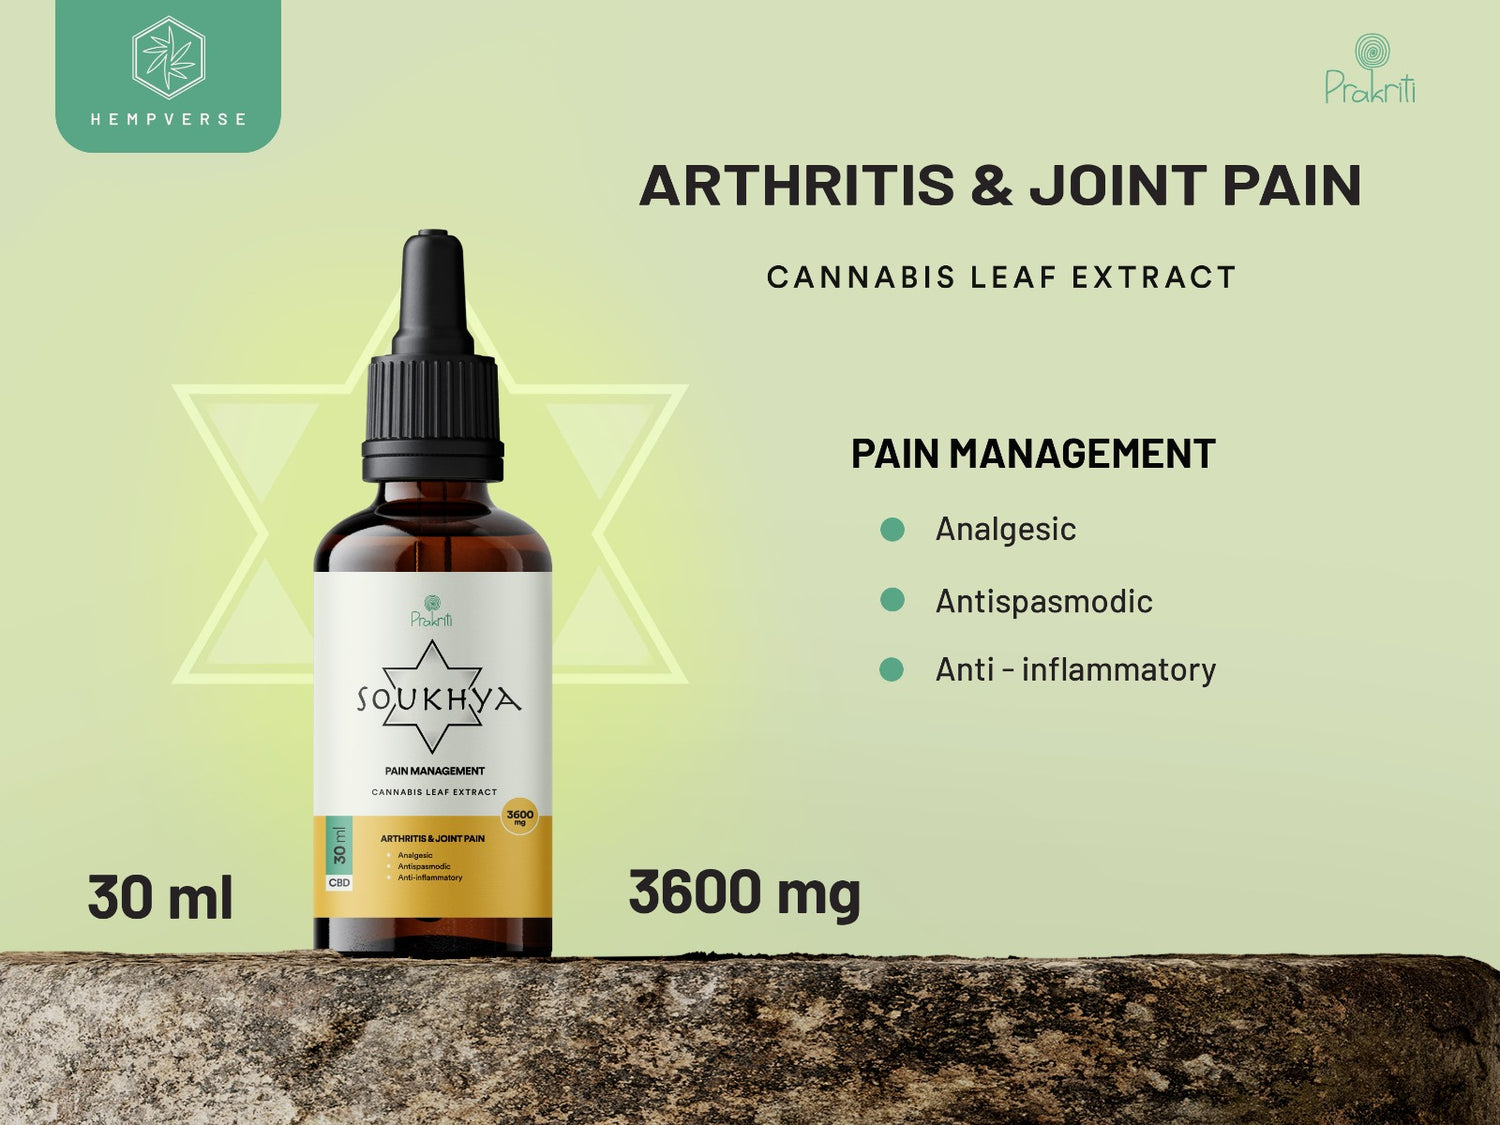 Soukhya is an ayurvedic medicine for pain management related to joint & muscle.